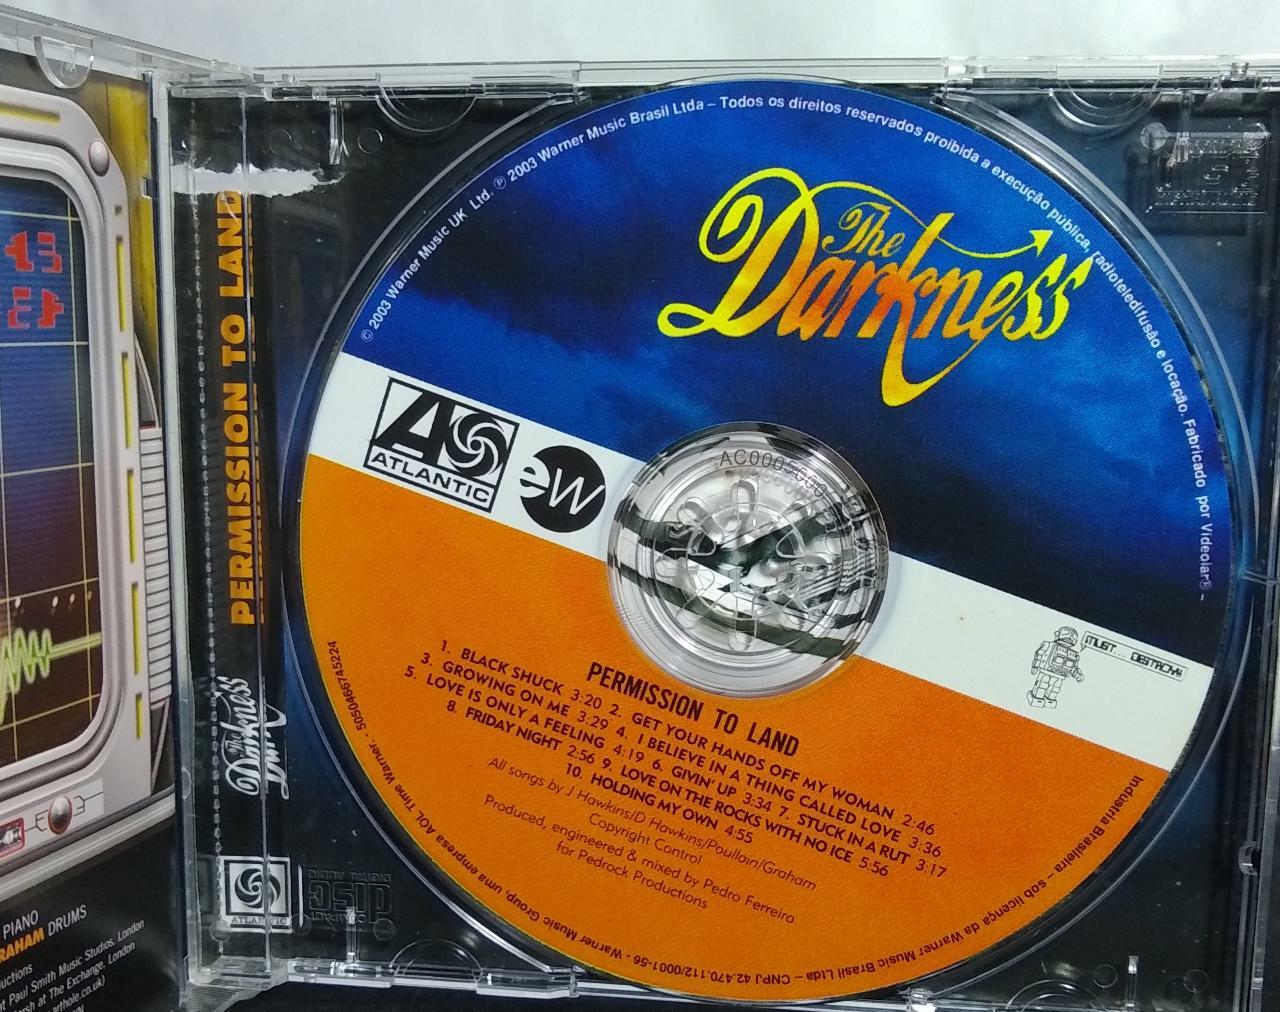 CD - Darkness The - Permission to Land